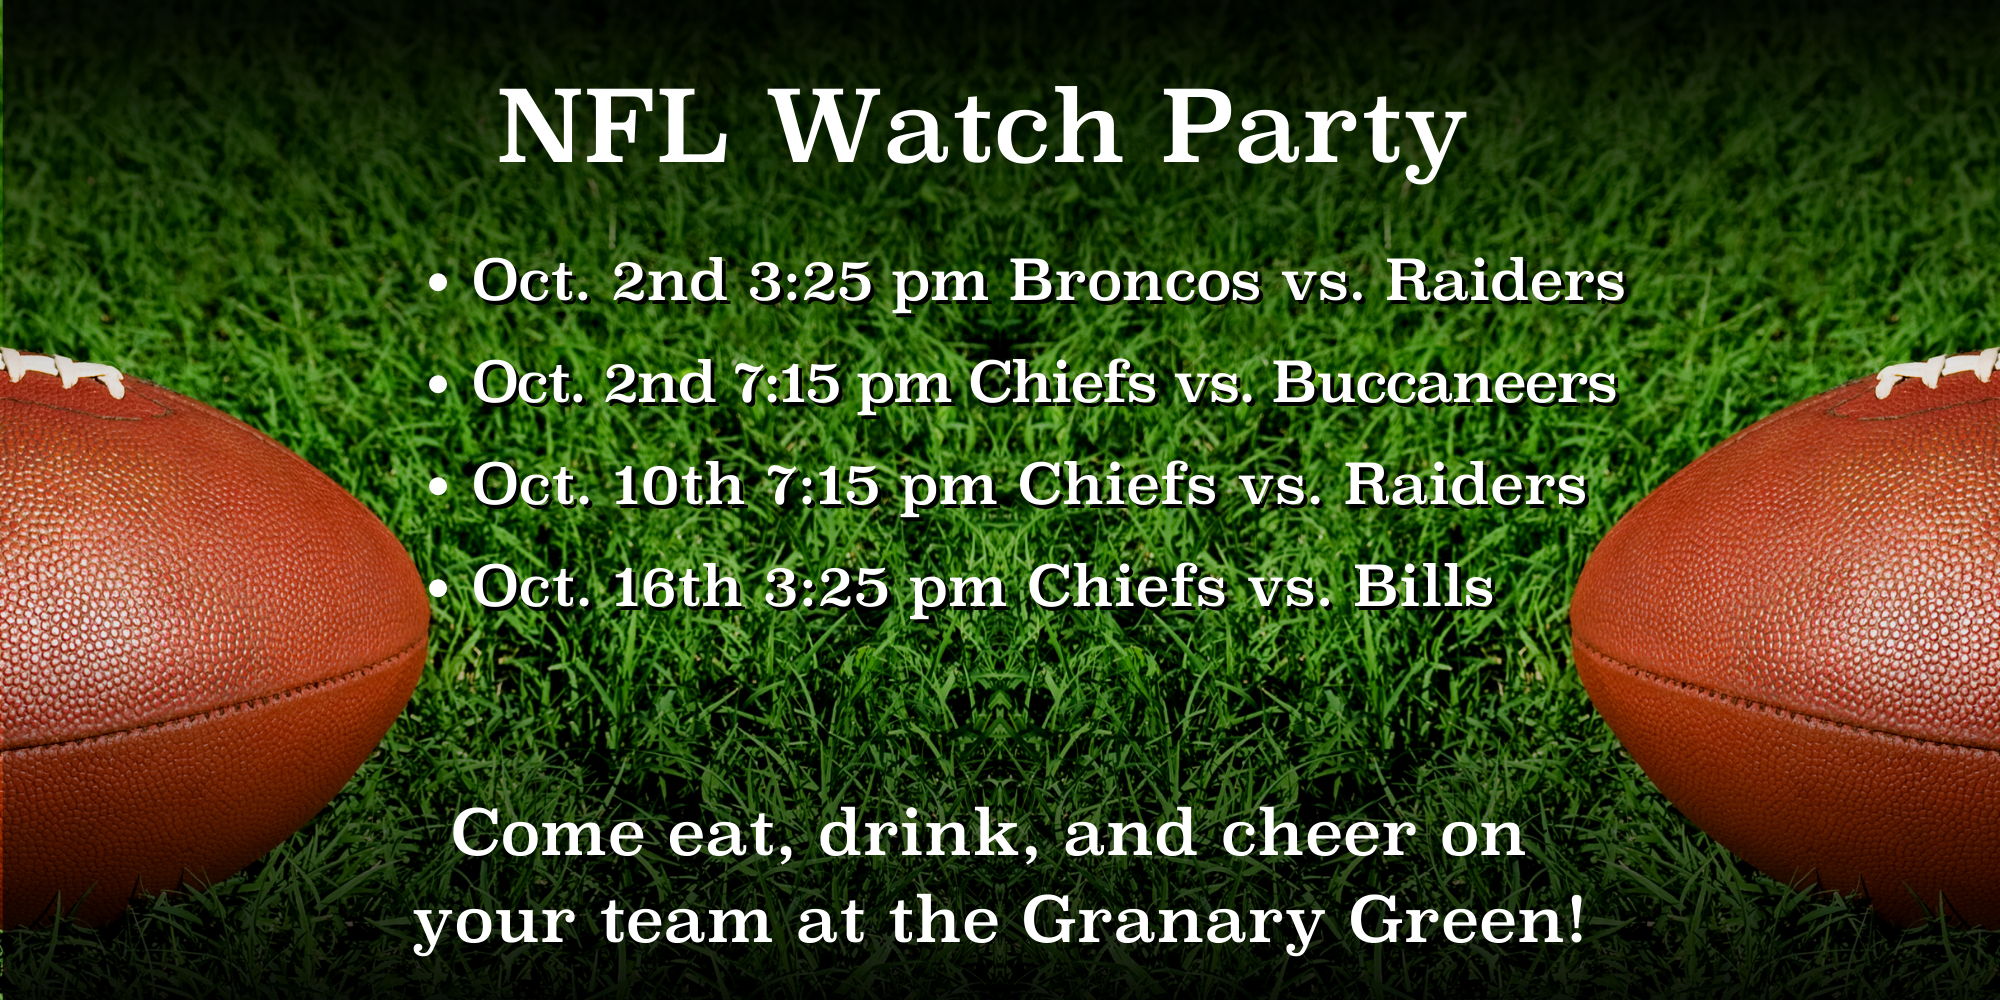 NFL Watch Party (Chiefs vs. Bills) promotional image